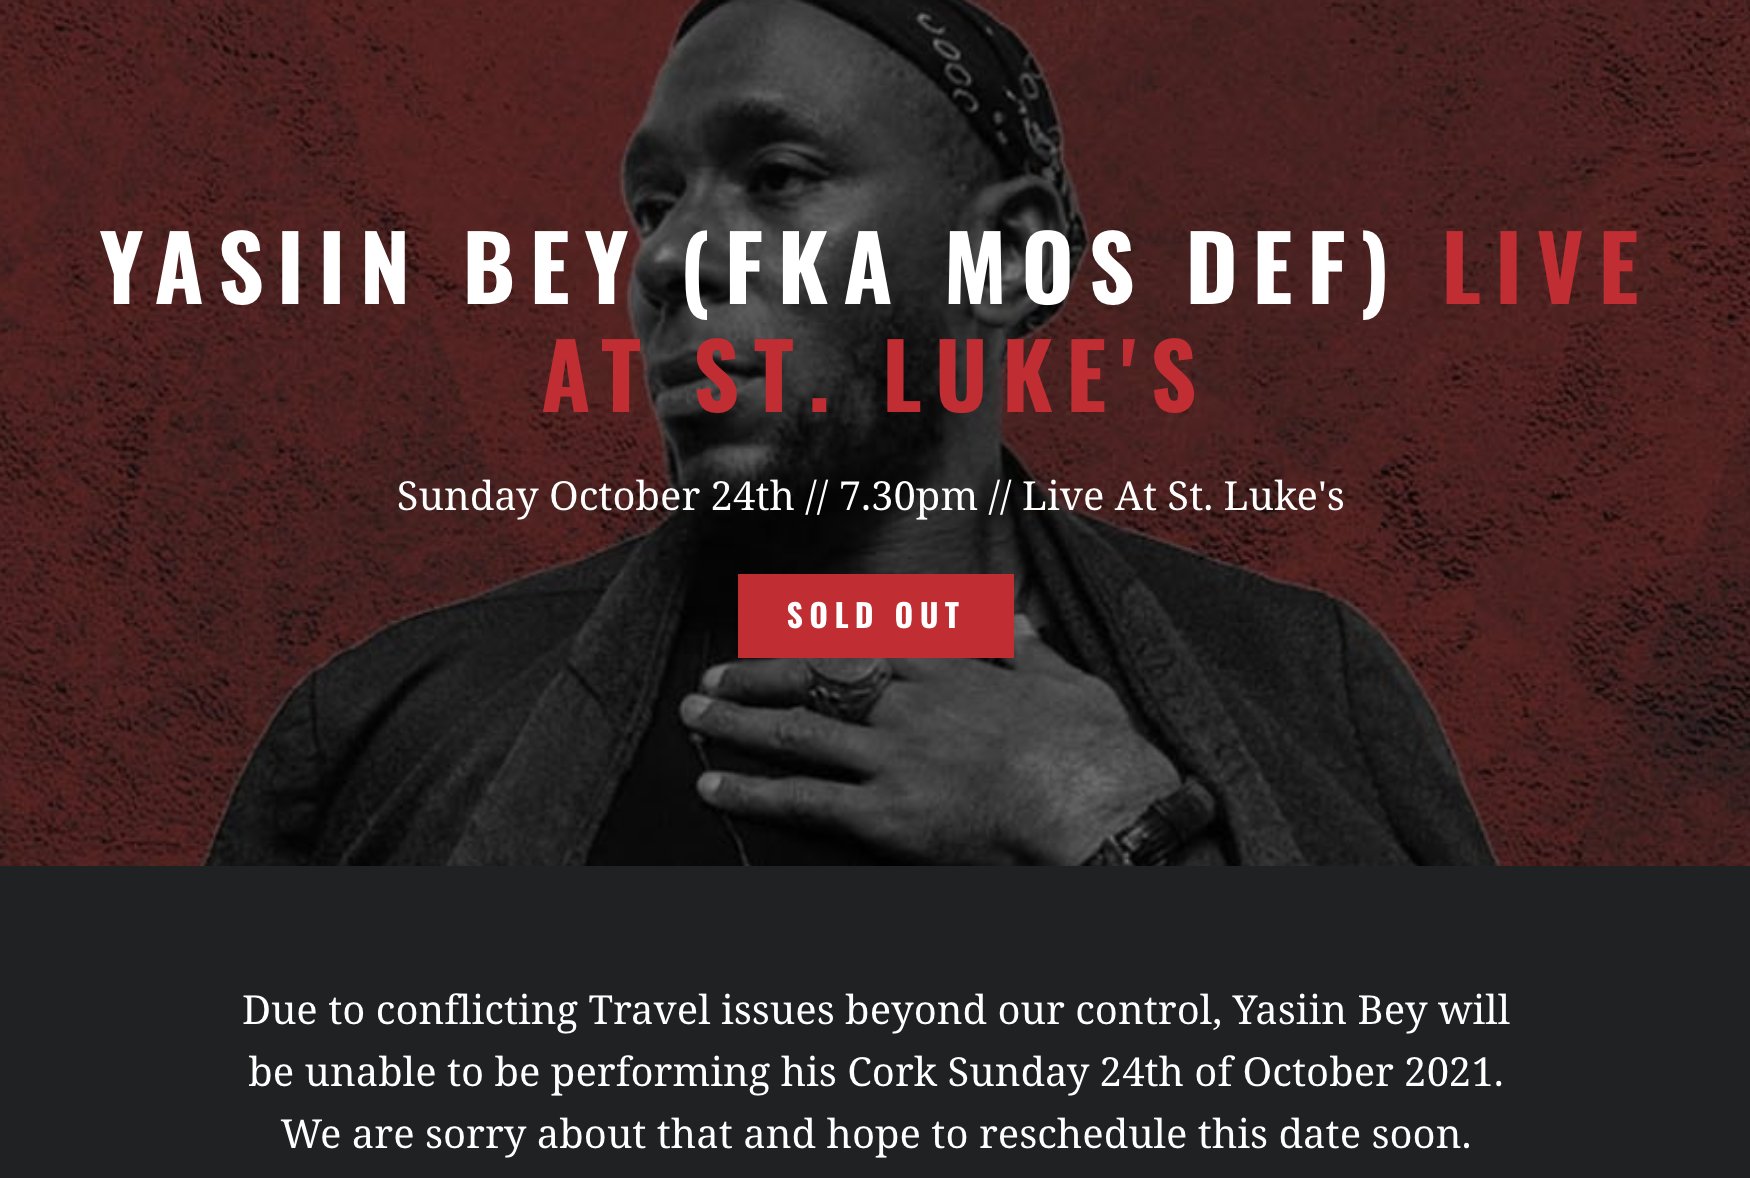 Live At St. Luke's on Twitter: Due to unforeseen circumstances Yasiin Bey  (Mos Def) show this Sunday has had to be cancelled. All ticket holders have  been contacted and full refunds processed 